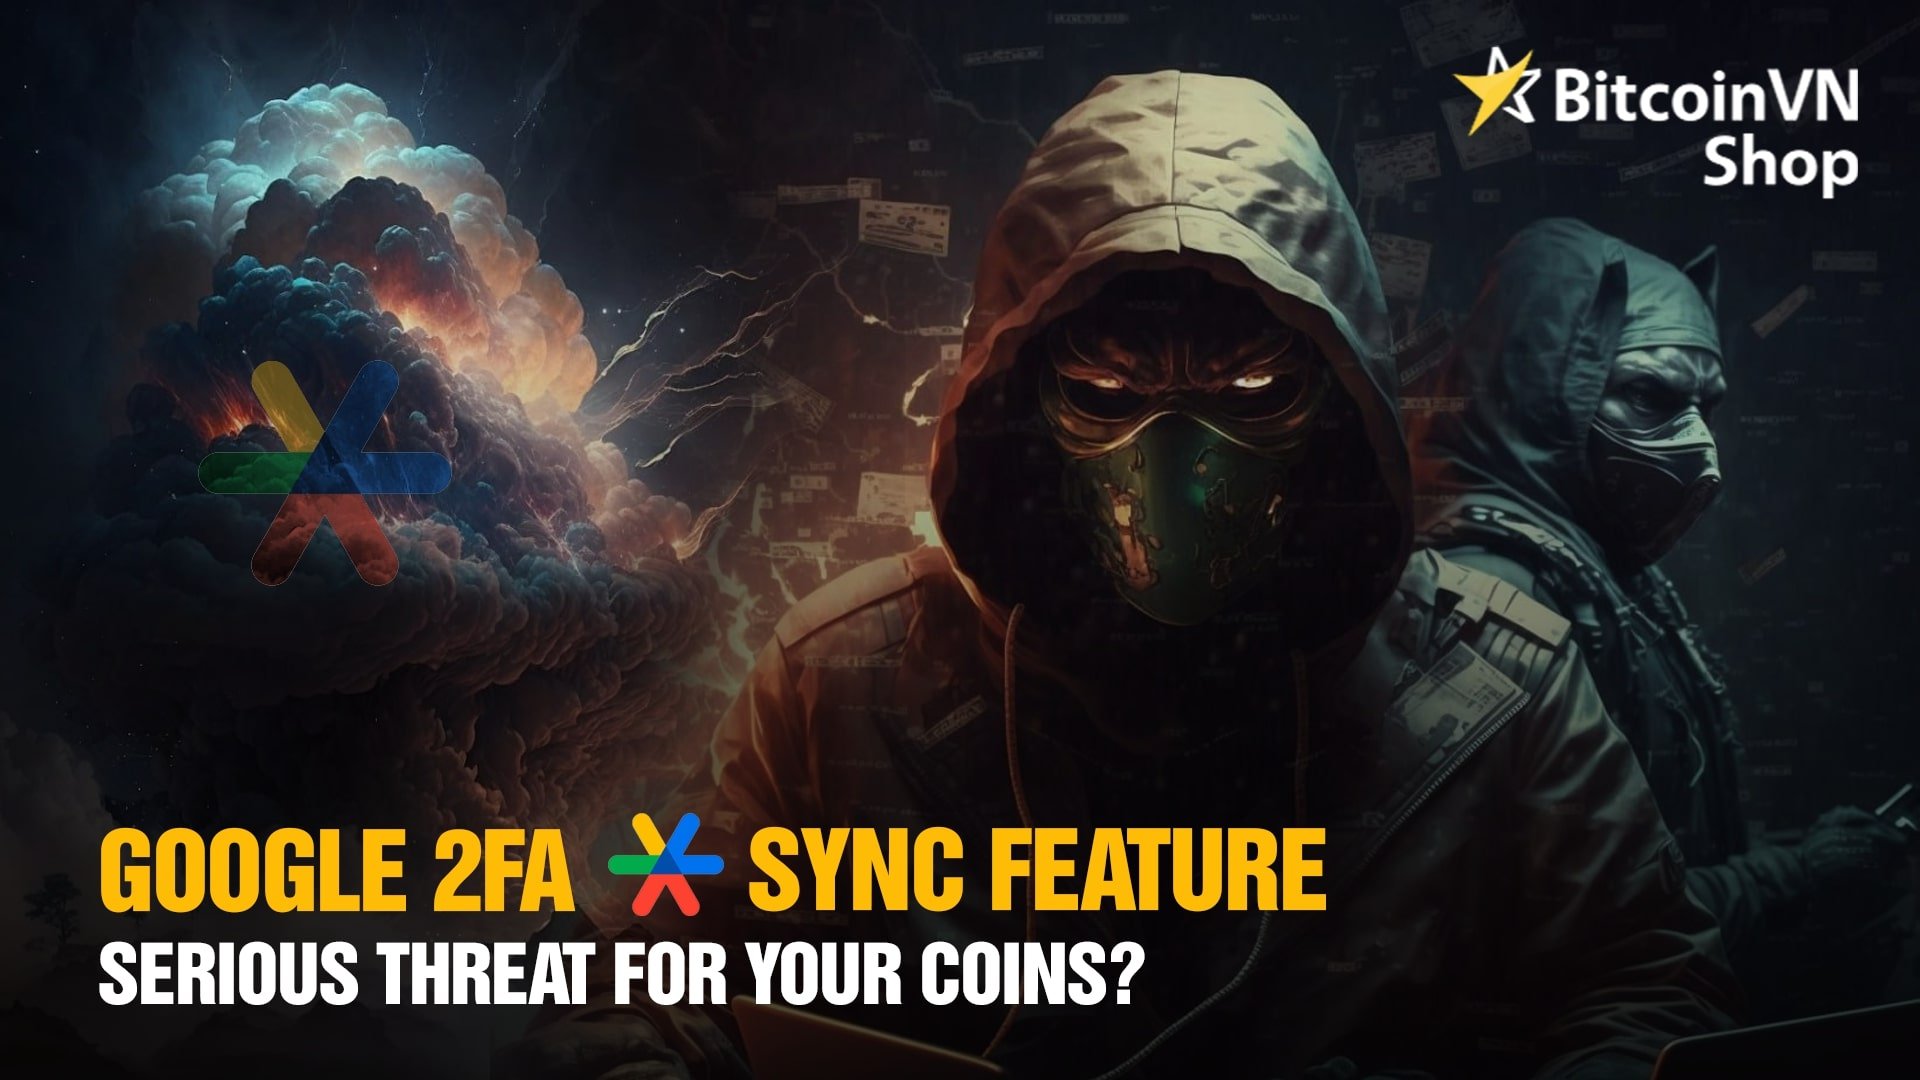 Google 2FA sync feature - serious threat for your coins?